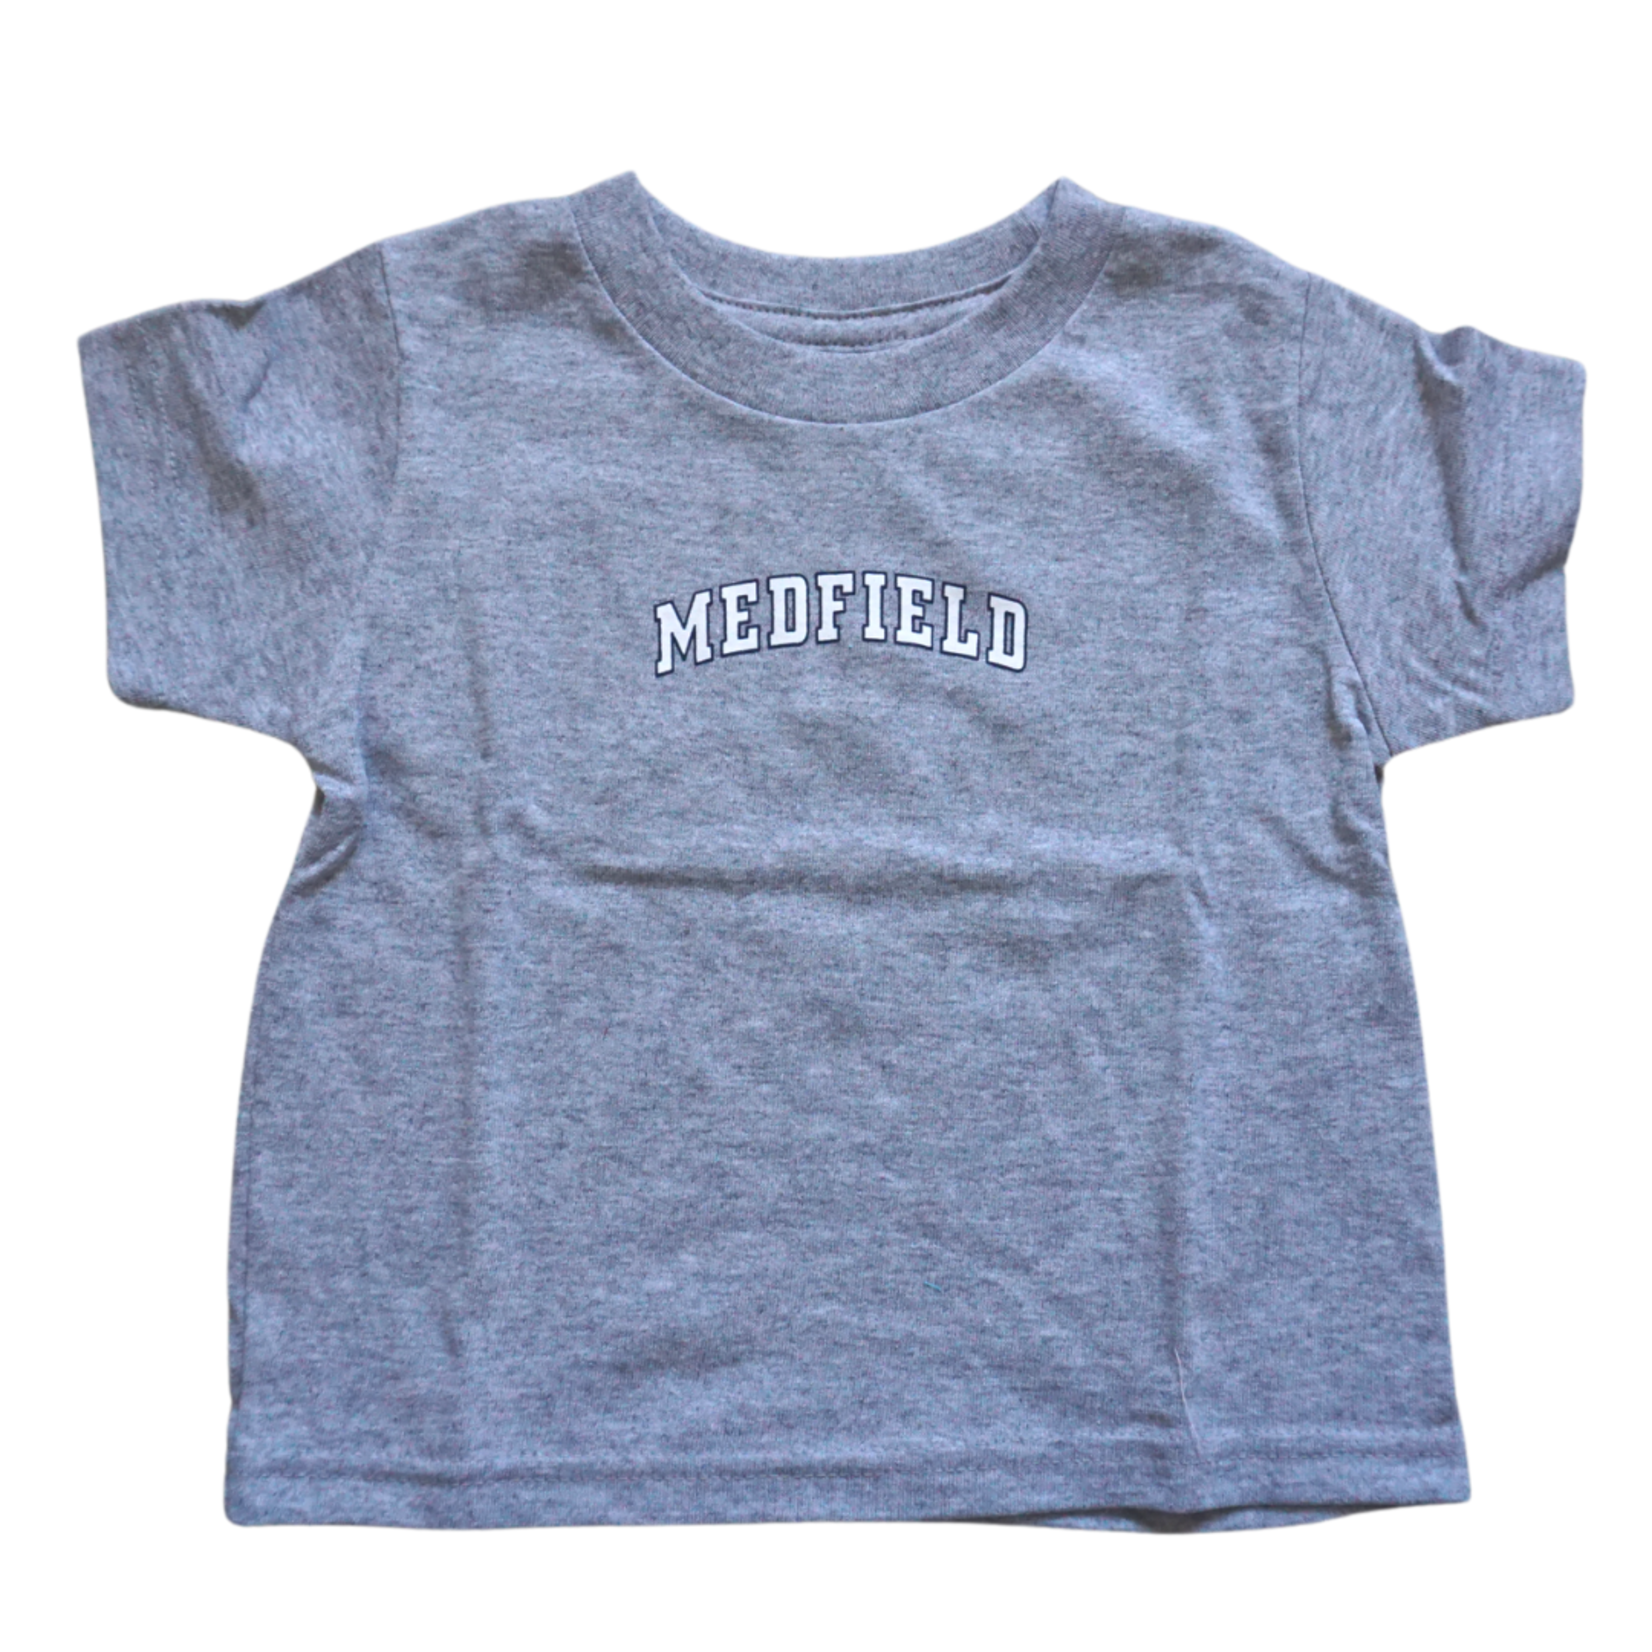 Medfield Toddler Shirts